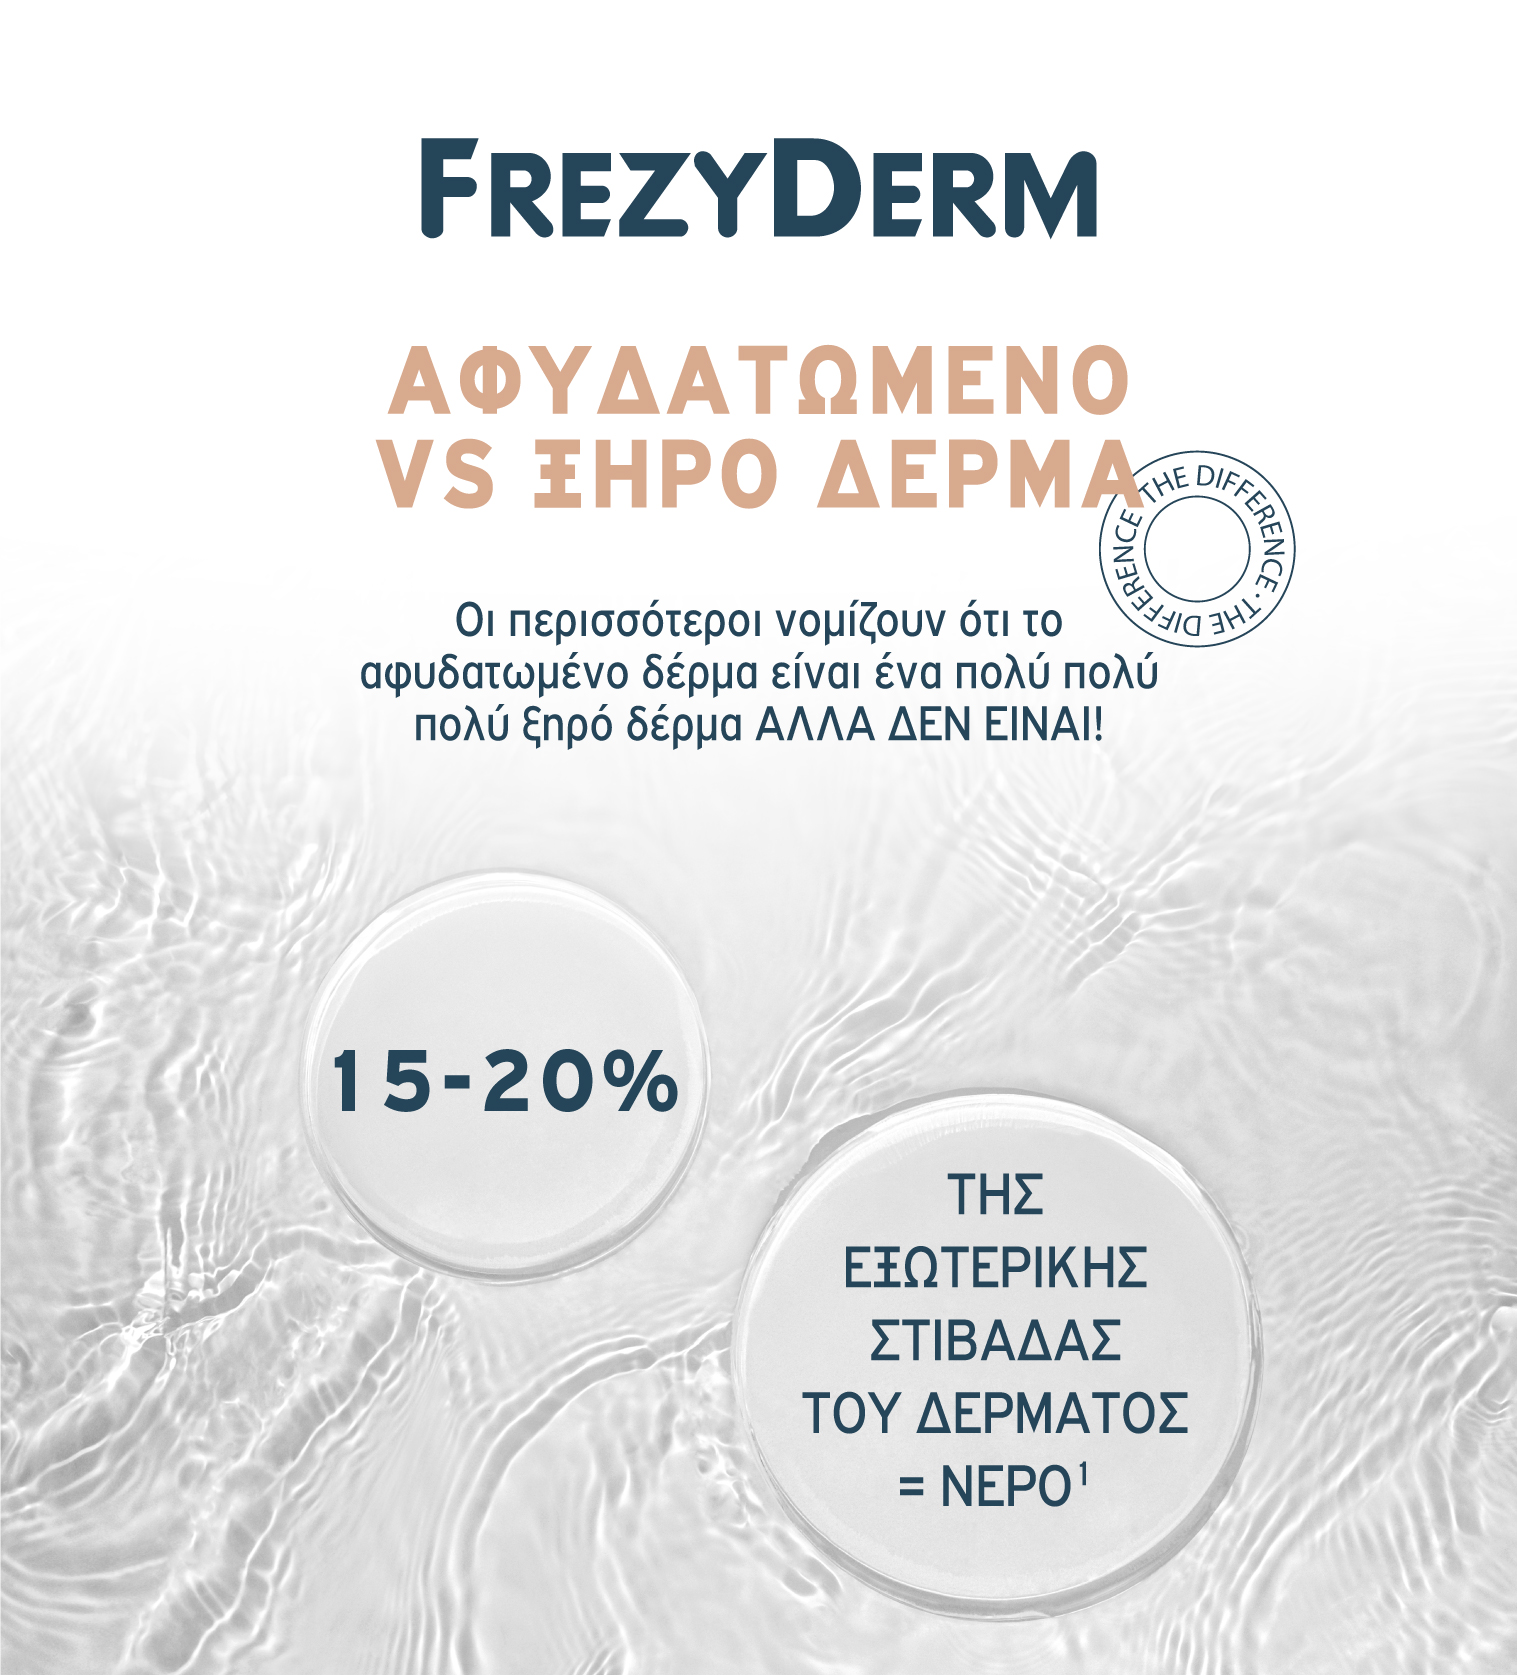 FREZYDERM INFOGRAPHIC MARCH